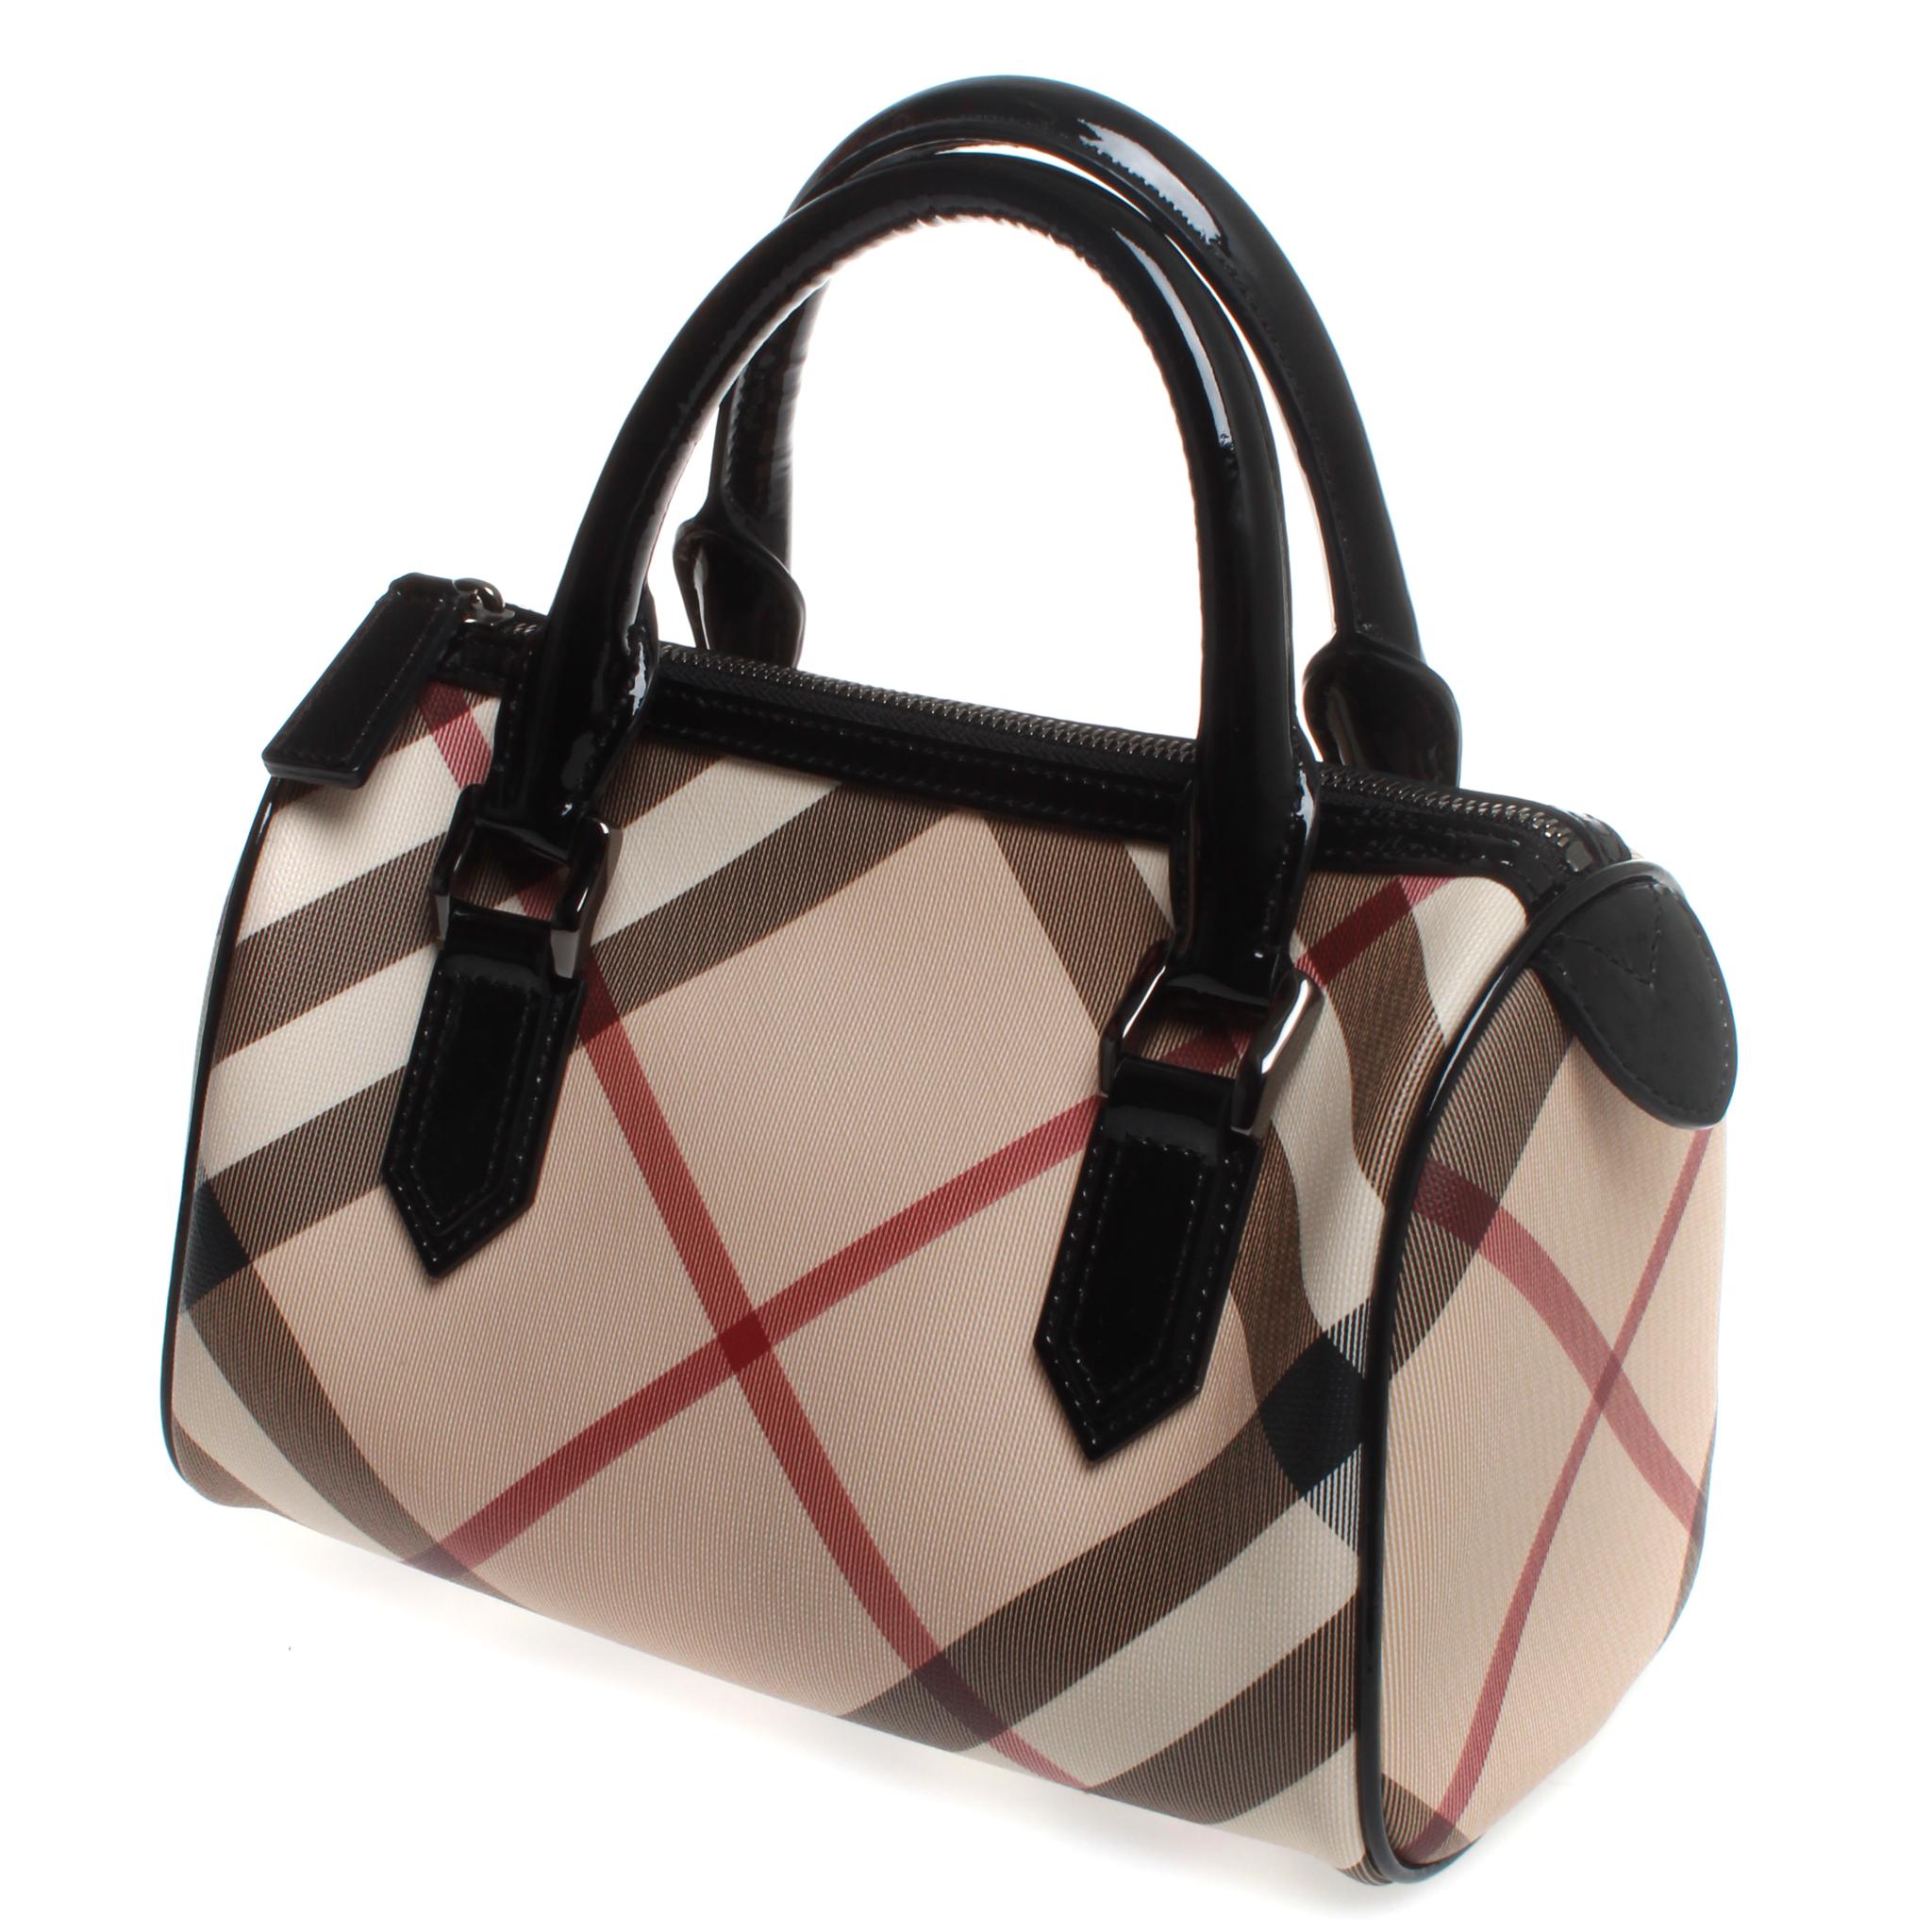 We guarantee this is an authentic Burberry Nova Check Small Chester Bowling Bag Black. This stylish tote is finely crafted of classic black, white, red and beige Nova check coated canvas. The bag features black rolled patent leather top handles and